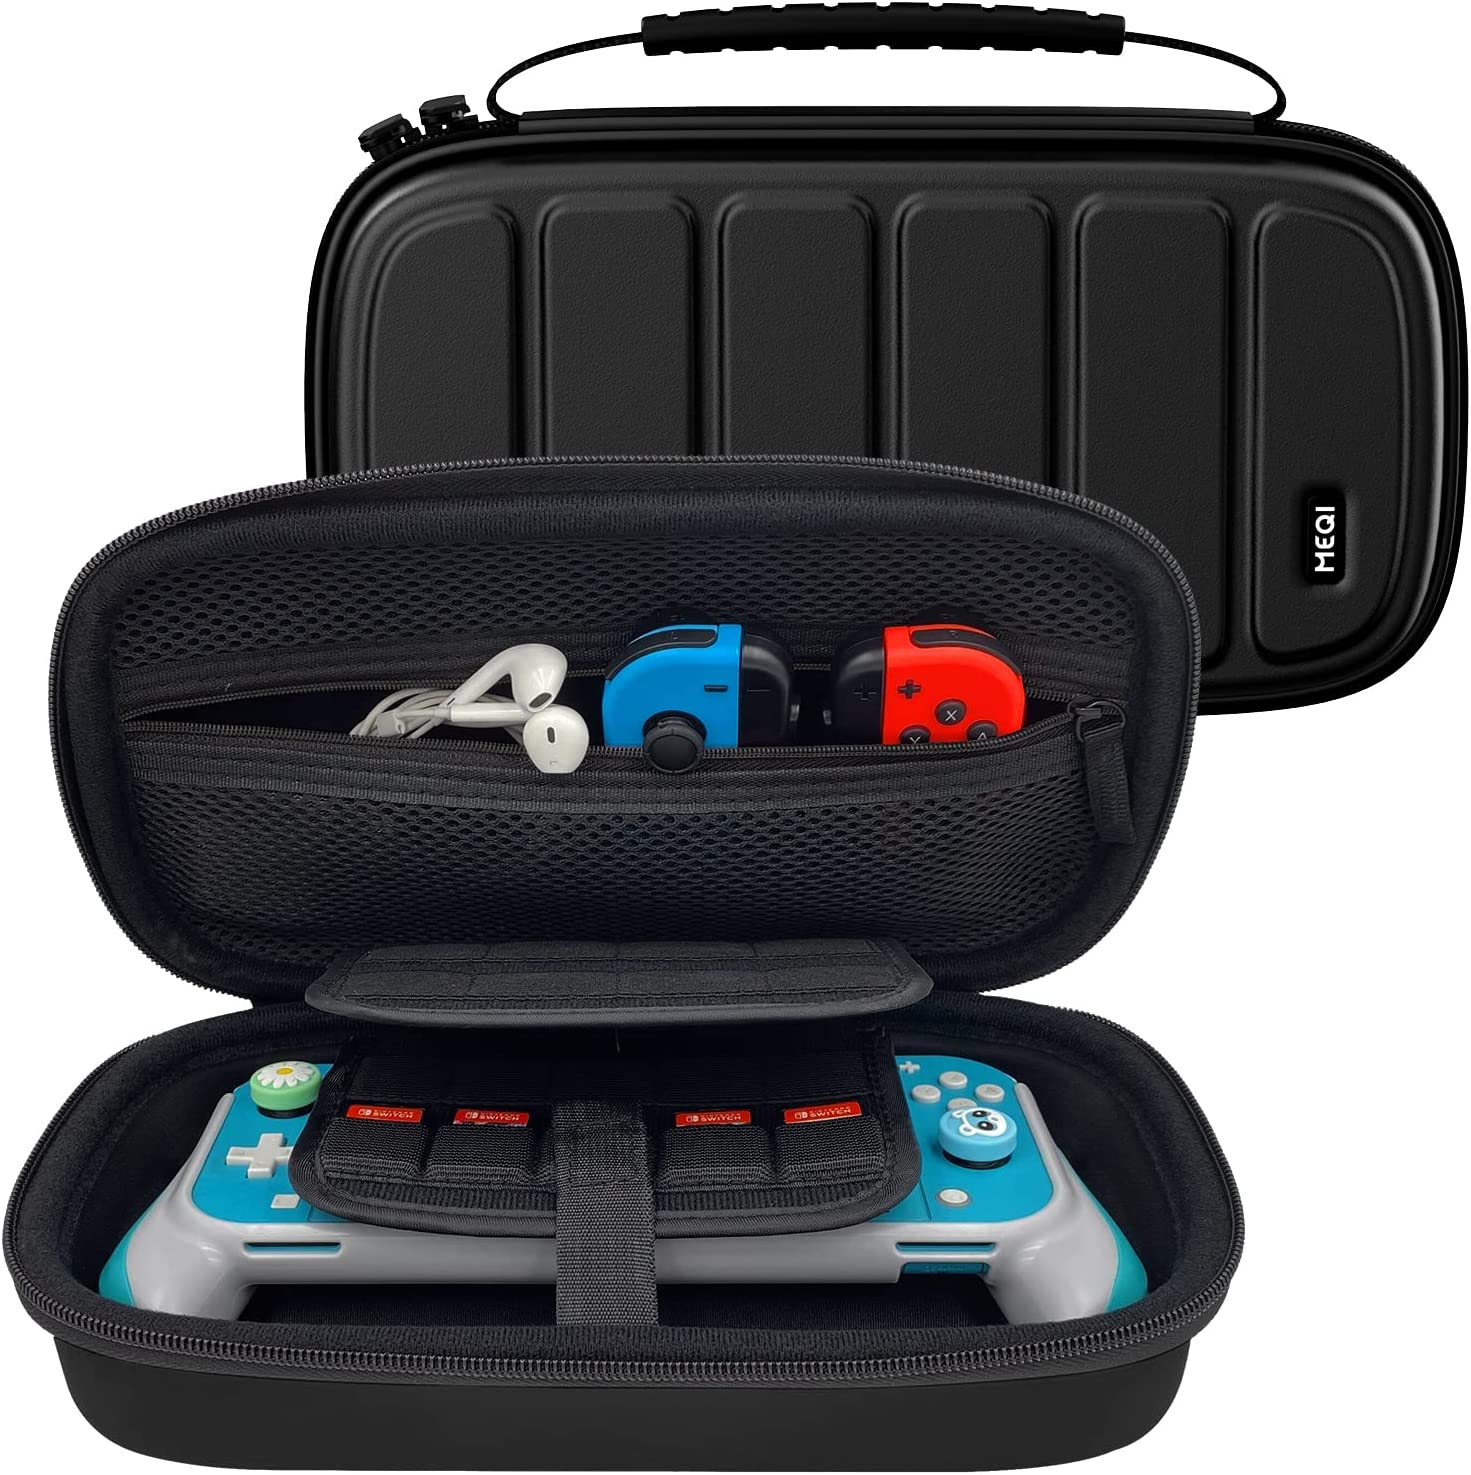 Carrying Case for Nintendo Switch/Oled Model/Switch Lite, Protective Travel Carry Pouch with 20 Game Card Slots & Large Space Pocket